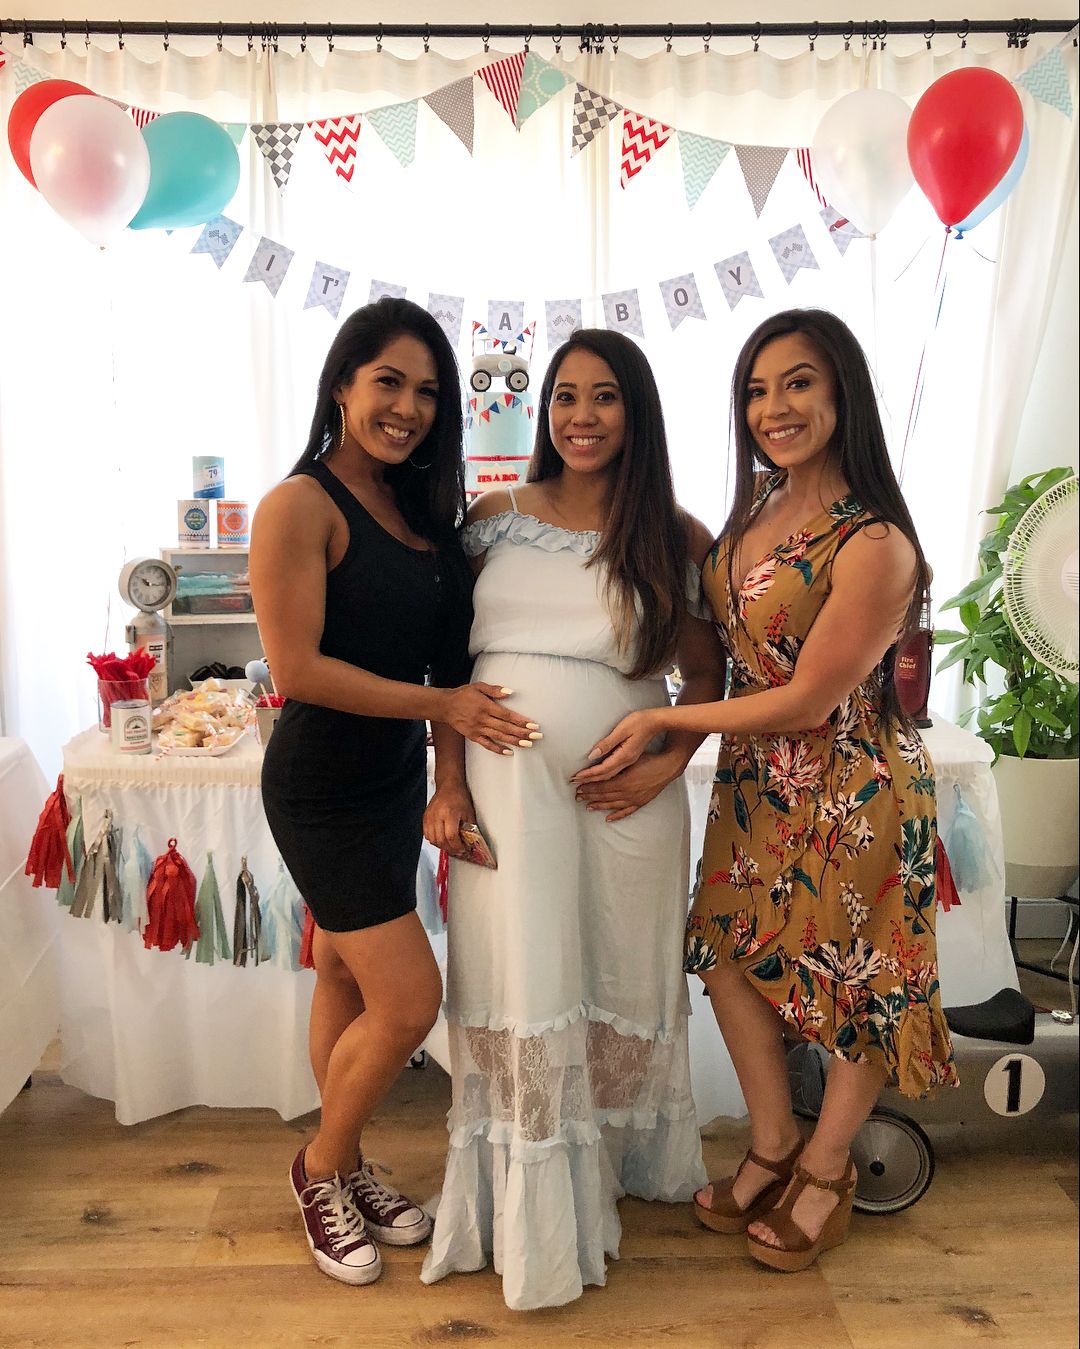 Full Size of Baby Shower:baby Shower Dresses Trendy Affordable Maternity Clothes Inexpensive Maternity Clothes Maternity Dresses For Photoshoot Long Maternity Dresses Maternity Dresses For Baby Shower Celebrity Baby Shower Dresses Maternity Blouses For Baby Shower